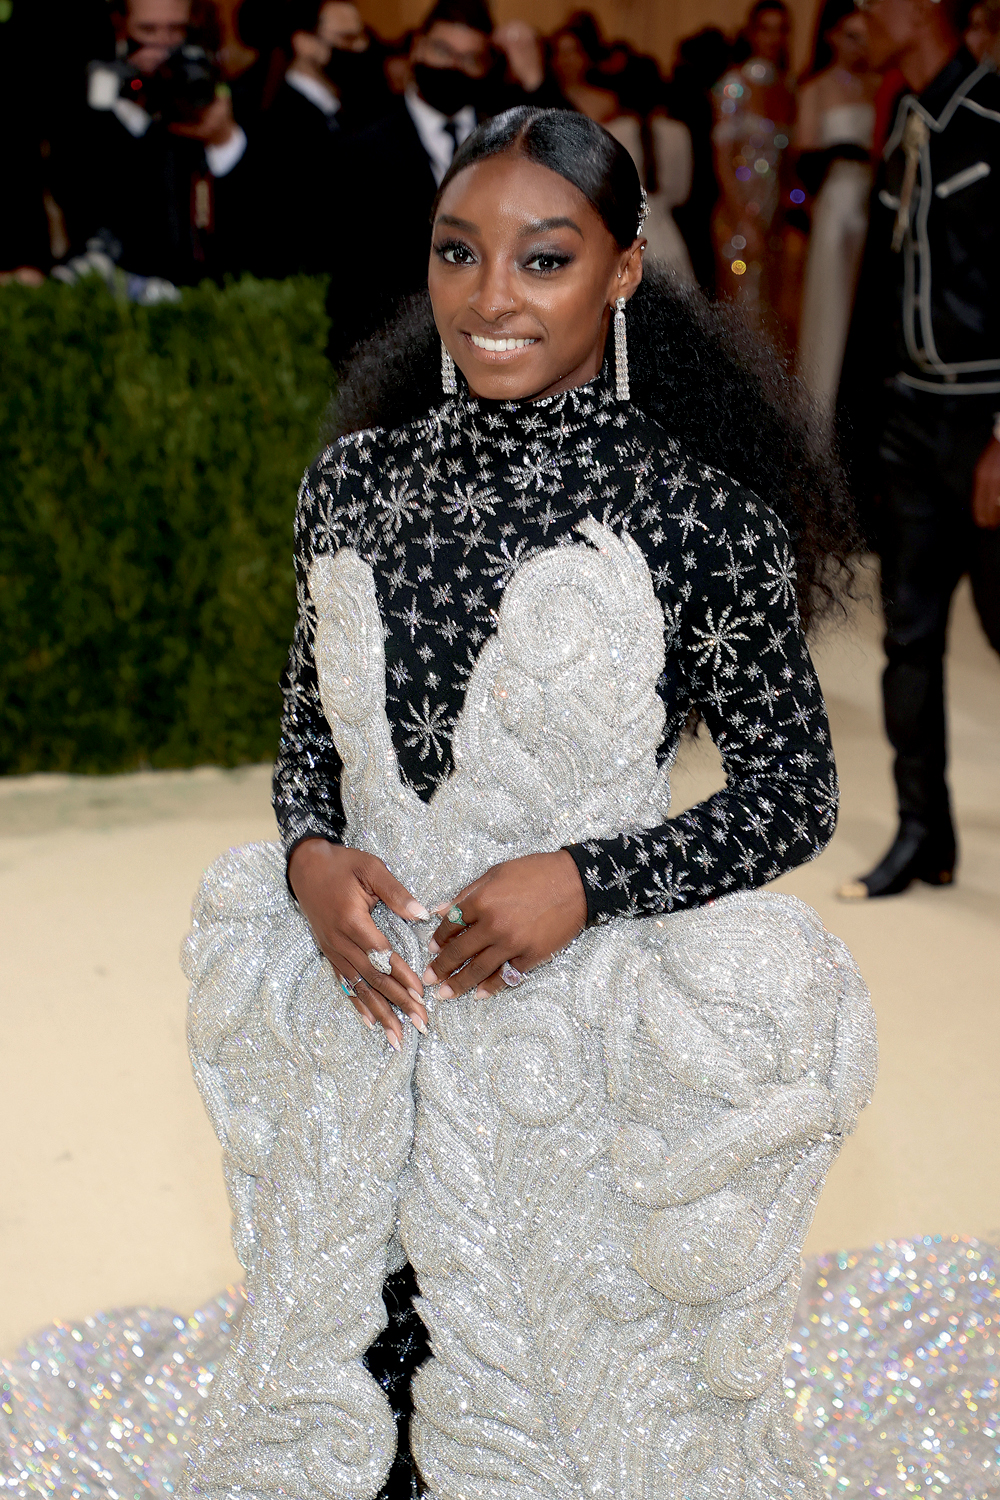 NEW YORK, NEW YORK - SEPTEMBER 13: Simone Biles attends The 2021 Met Gala Celebrating In America: A Lexicon Of Fashion at Metropolitan Museum of Art on September 13, 2021 in New York City. Dimitrios Kambouris/Getty Images for The Met Museum/Vogue /AFP (Photo by Dimitrios Kambouris / GETTY IMAGES NORTH AMERICA / Getty Images via AFP)